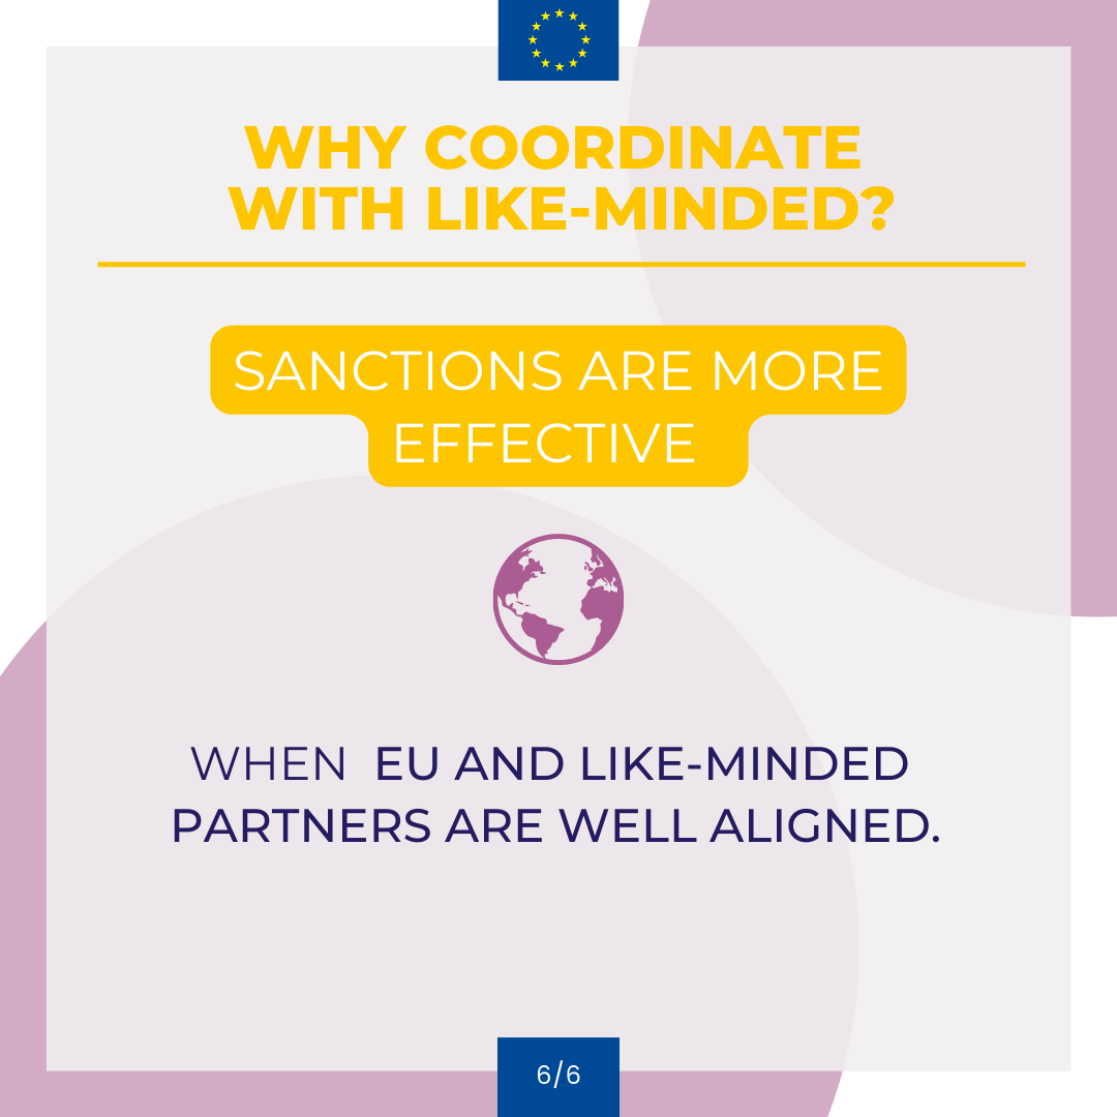 Why coordinate sanctions with like-minded?